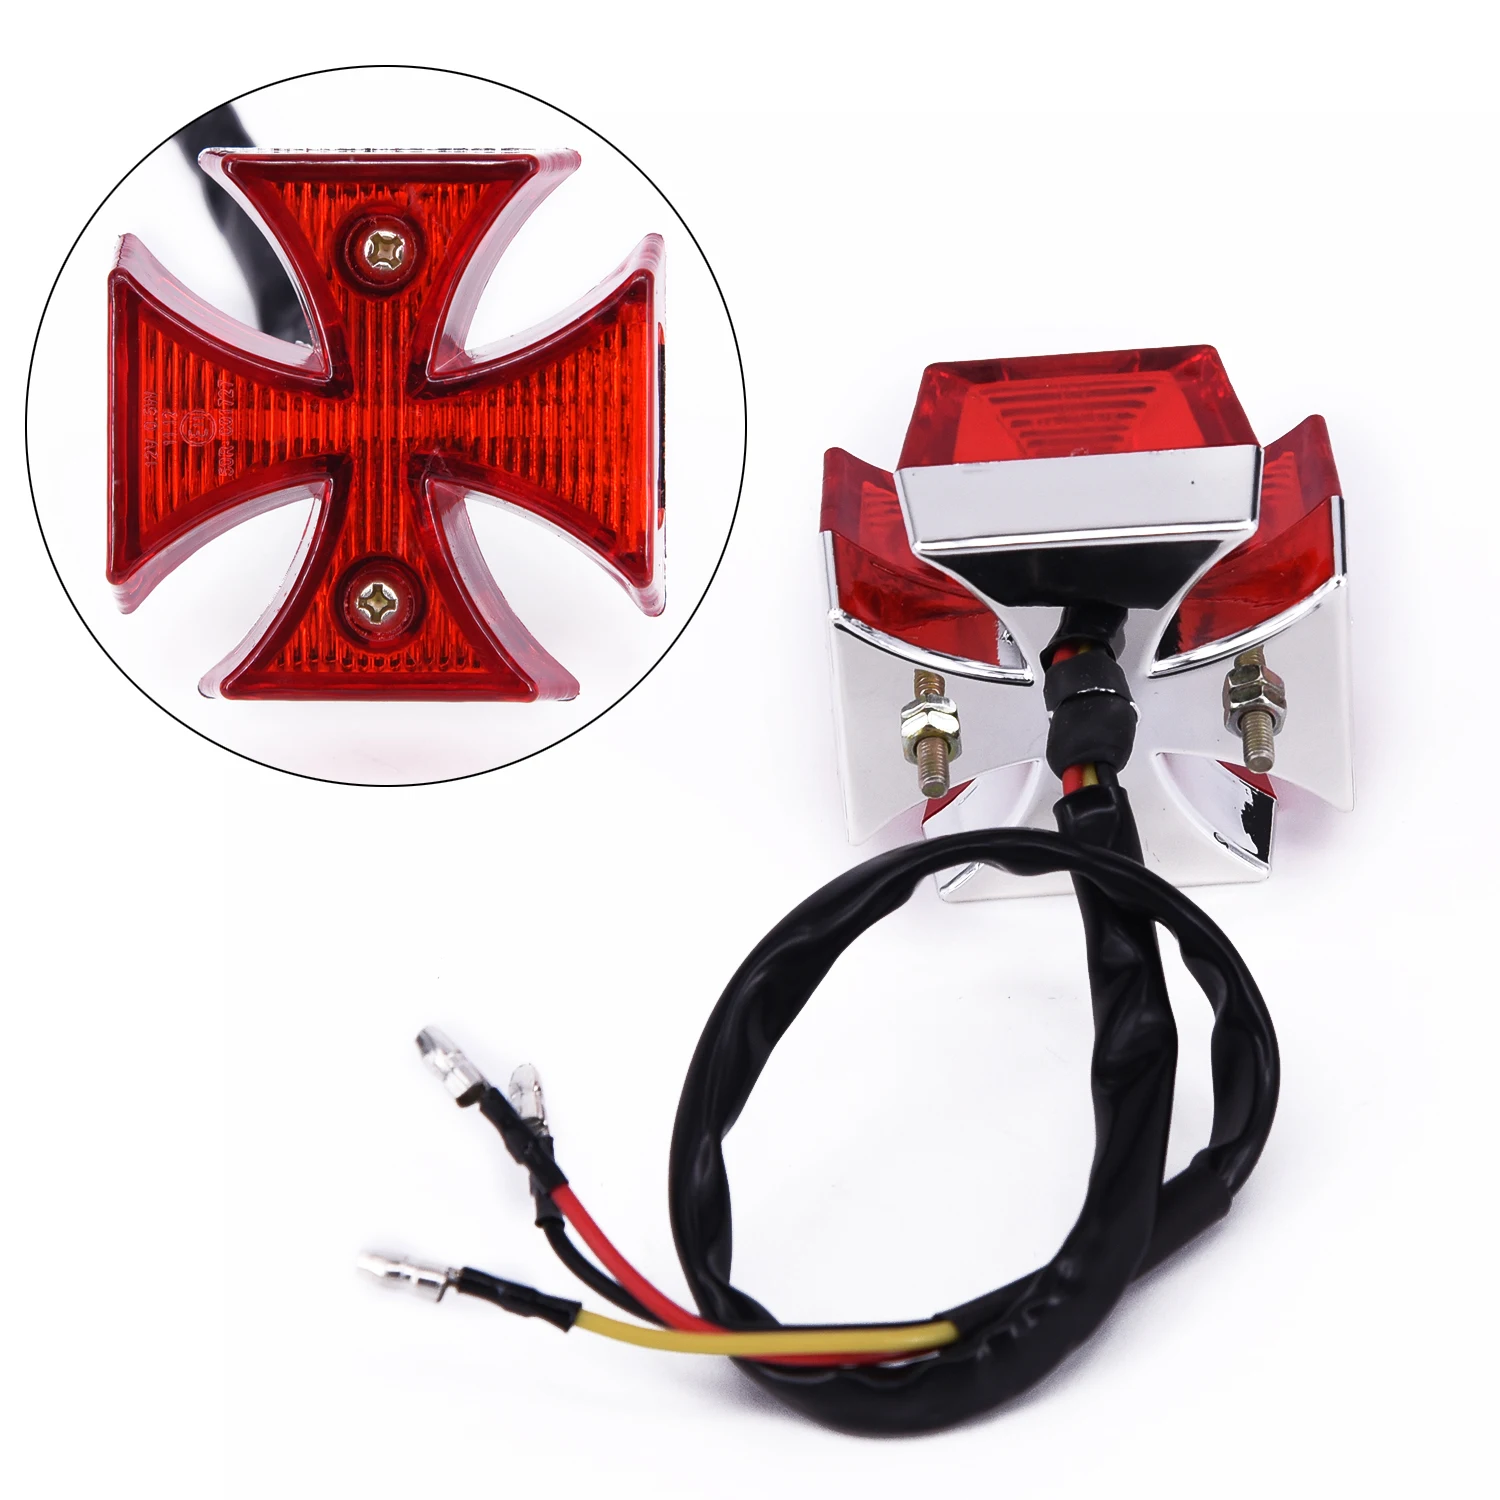 Motorcycle Tail Light - Distinctive Maltese Cross Design, Universal Fit for Ch - £10.17 GBP